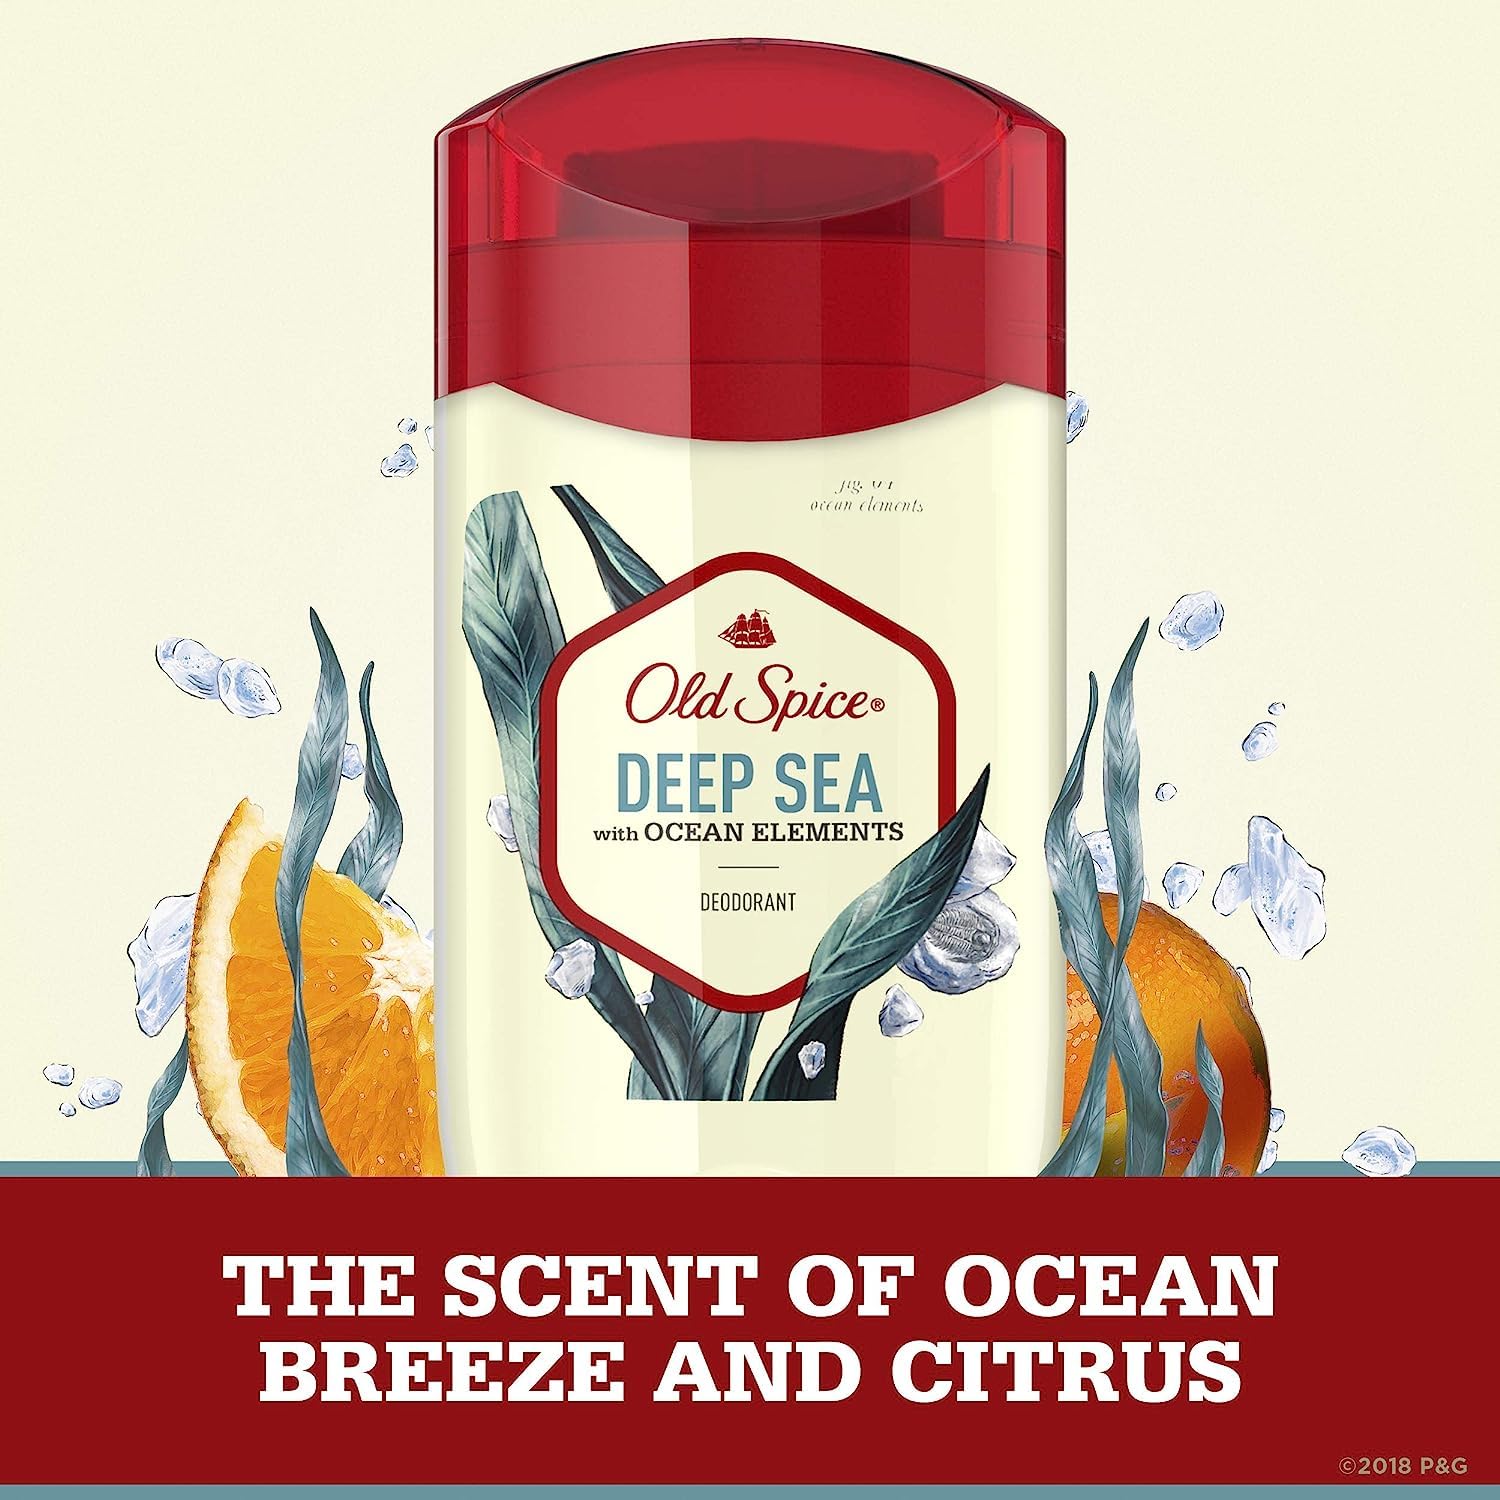 Old Spice Deodorant for Men Deep Sea with Ocean Elements Scent Inspired by Nature 3 oz